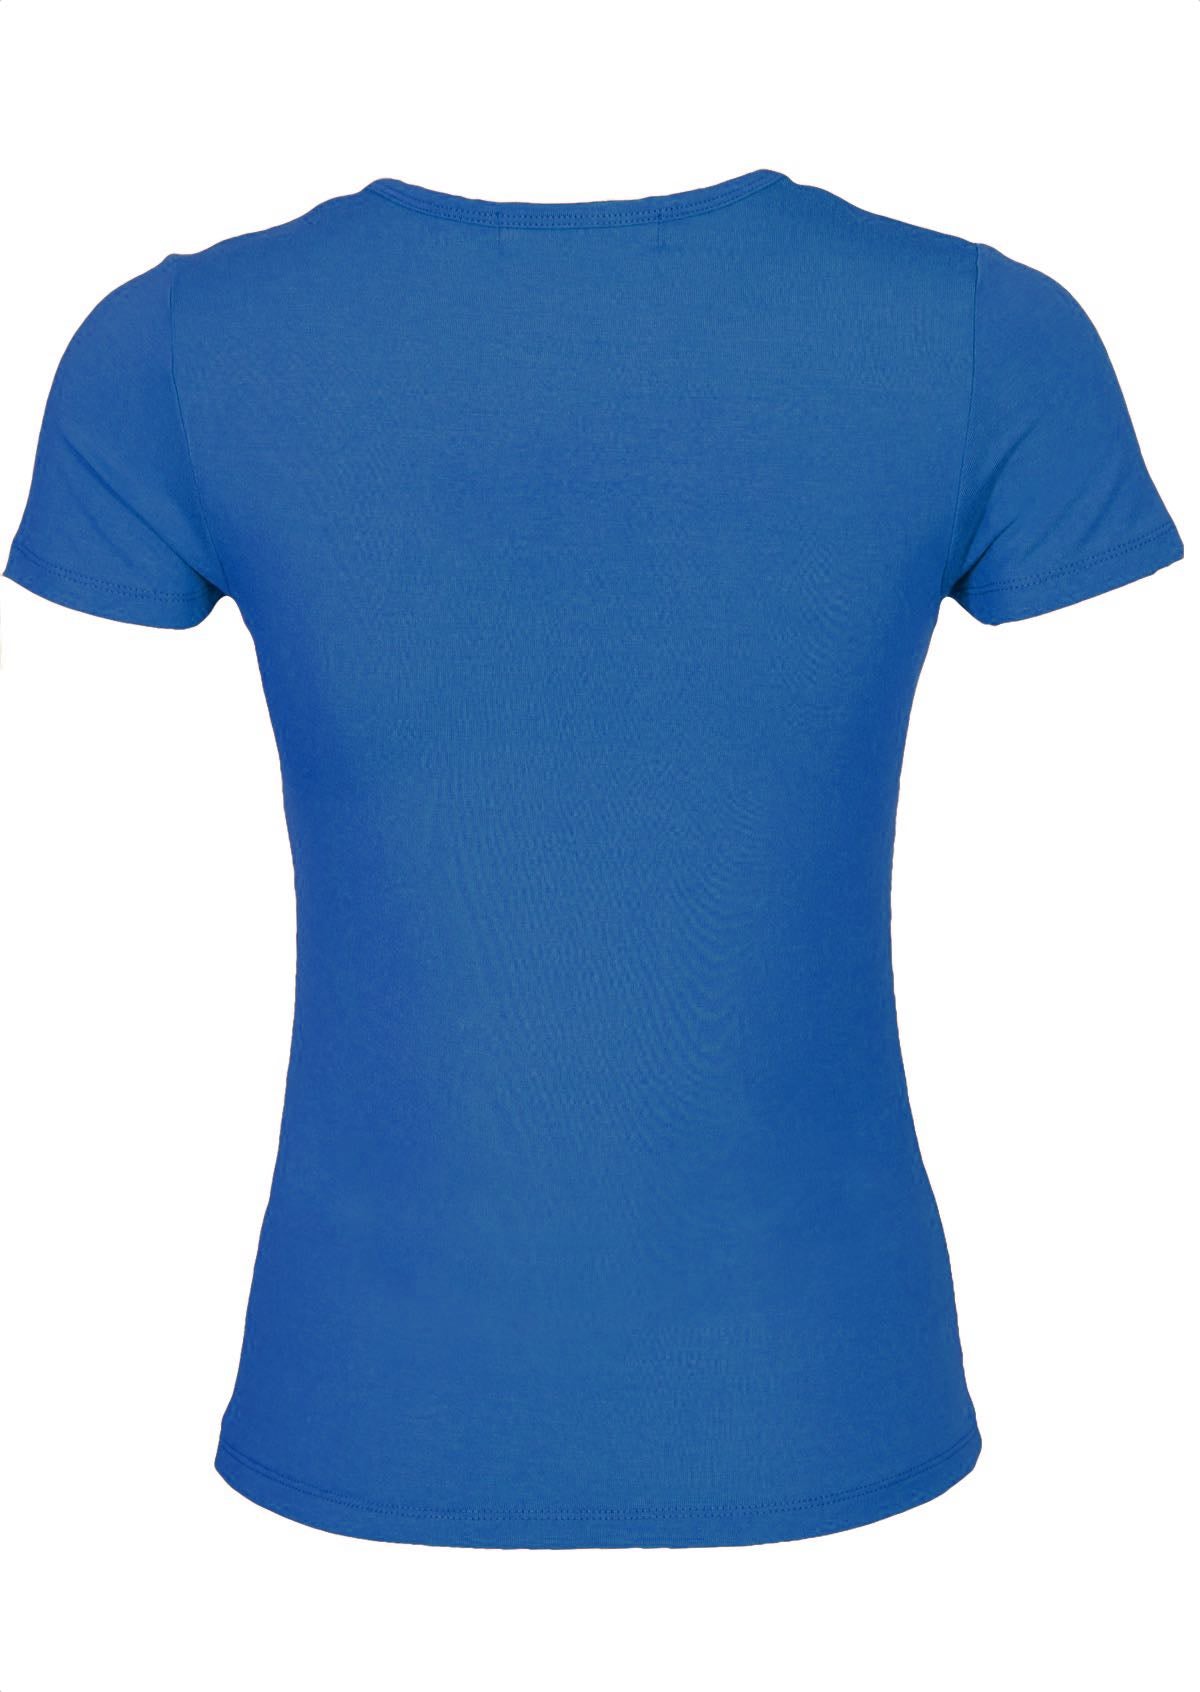 back view fitted women's short sleeve top